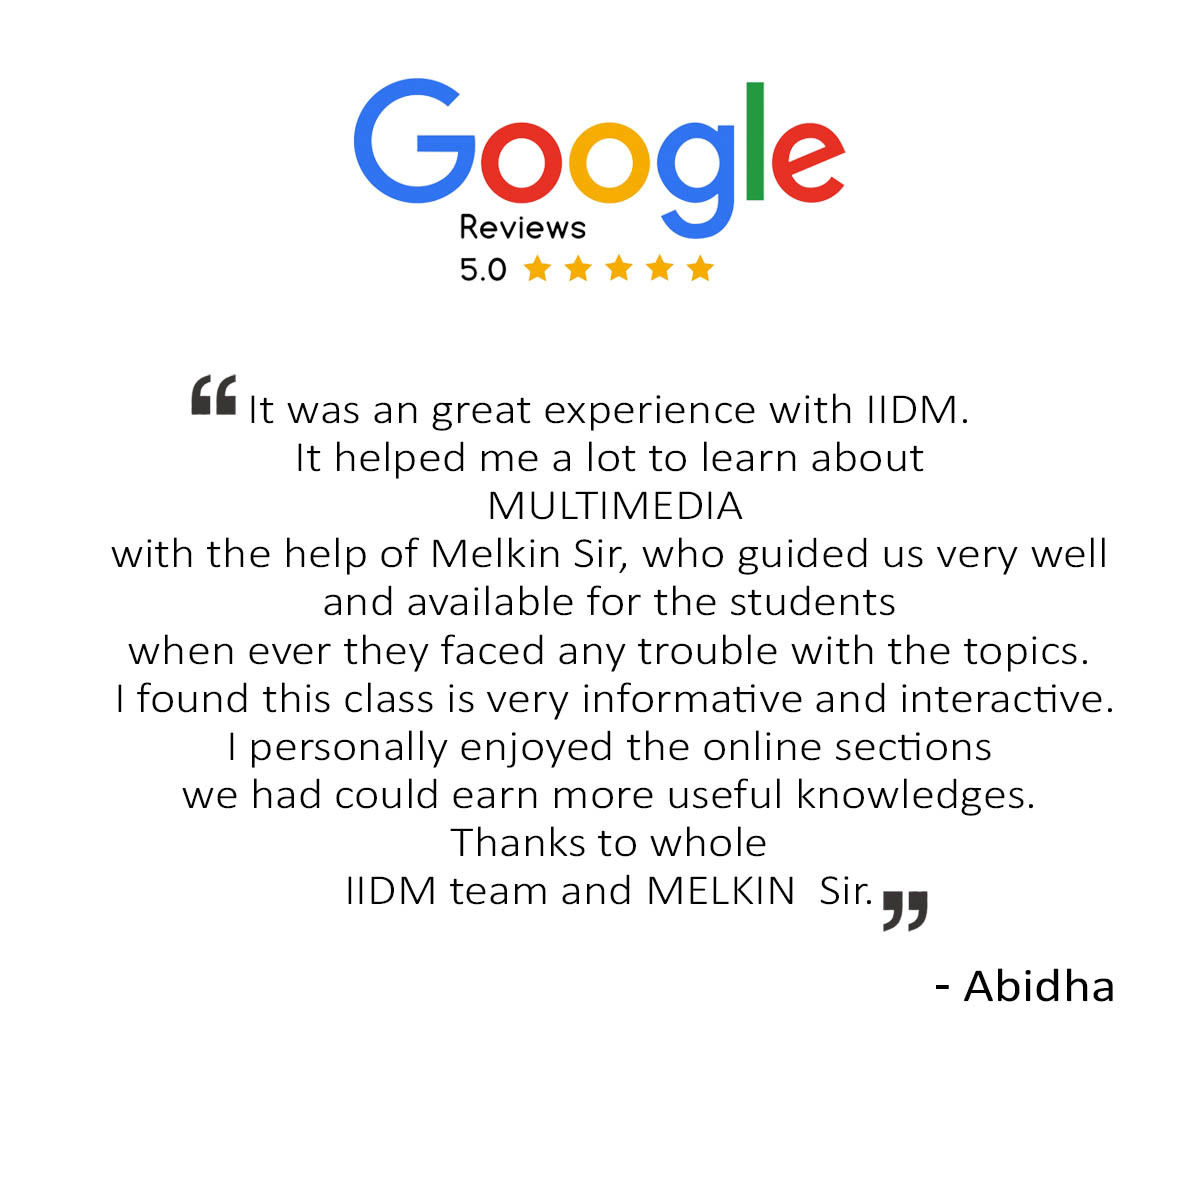 GOOGLE_REVIEW_GRAPHIC_ABIDHA_copy